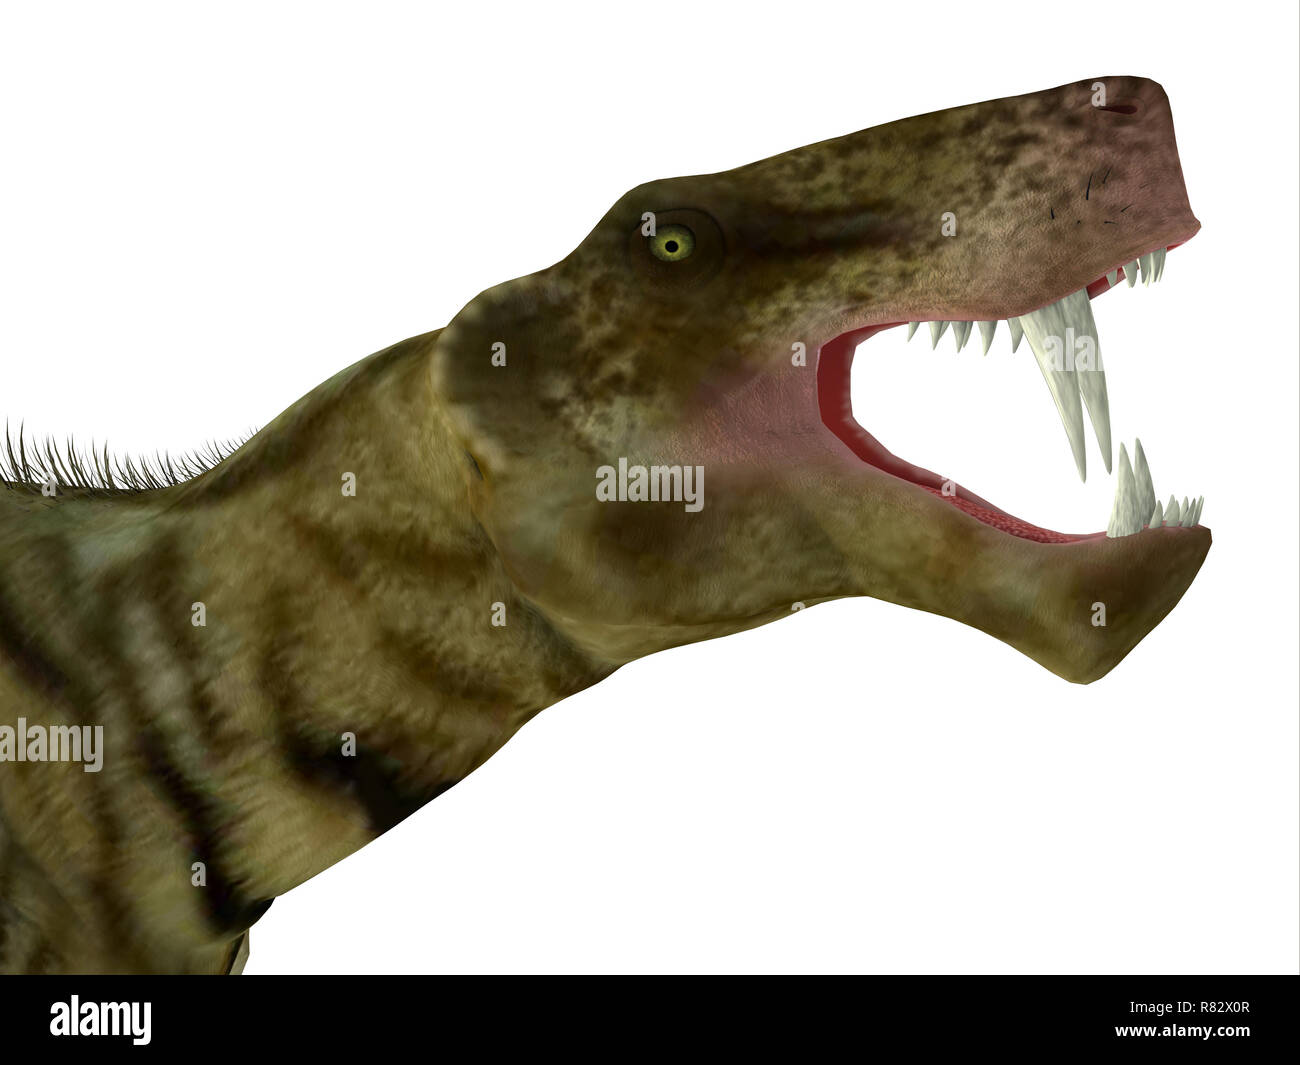 Inostrancevia Dinosaur Head - Inostrancevia was a carnivorous cat-like dinosaur that lived in Russia during the Permian Period. Stock Photo